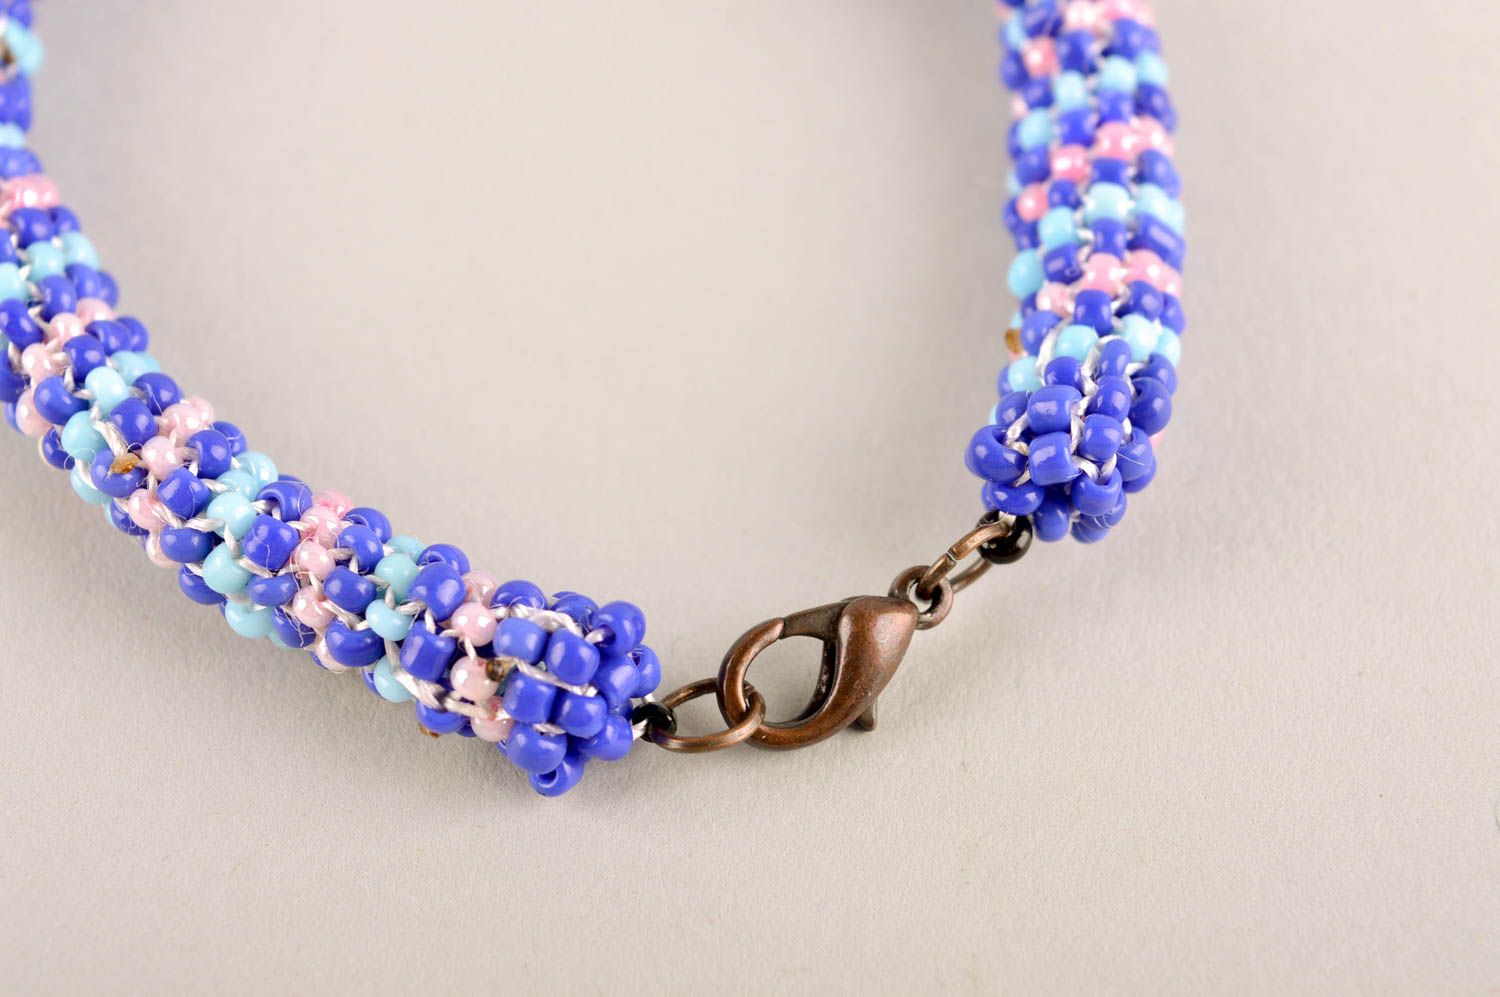 Beaded jewelry handmade bracelet women accessories unique jewelry gifts for her photo 4